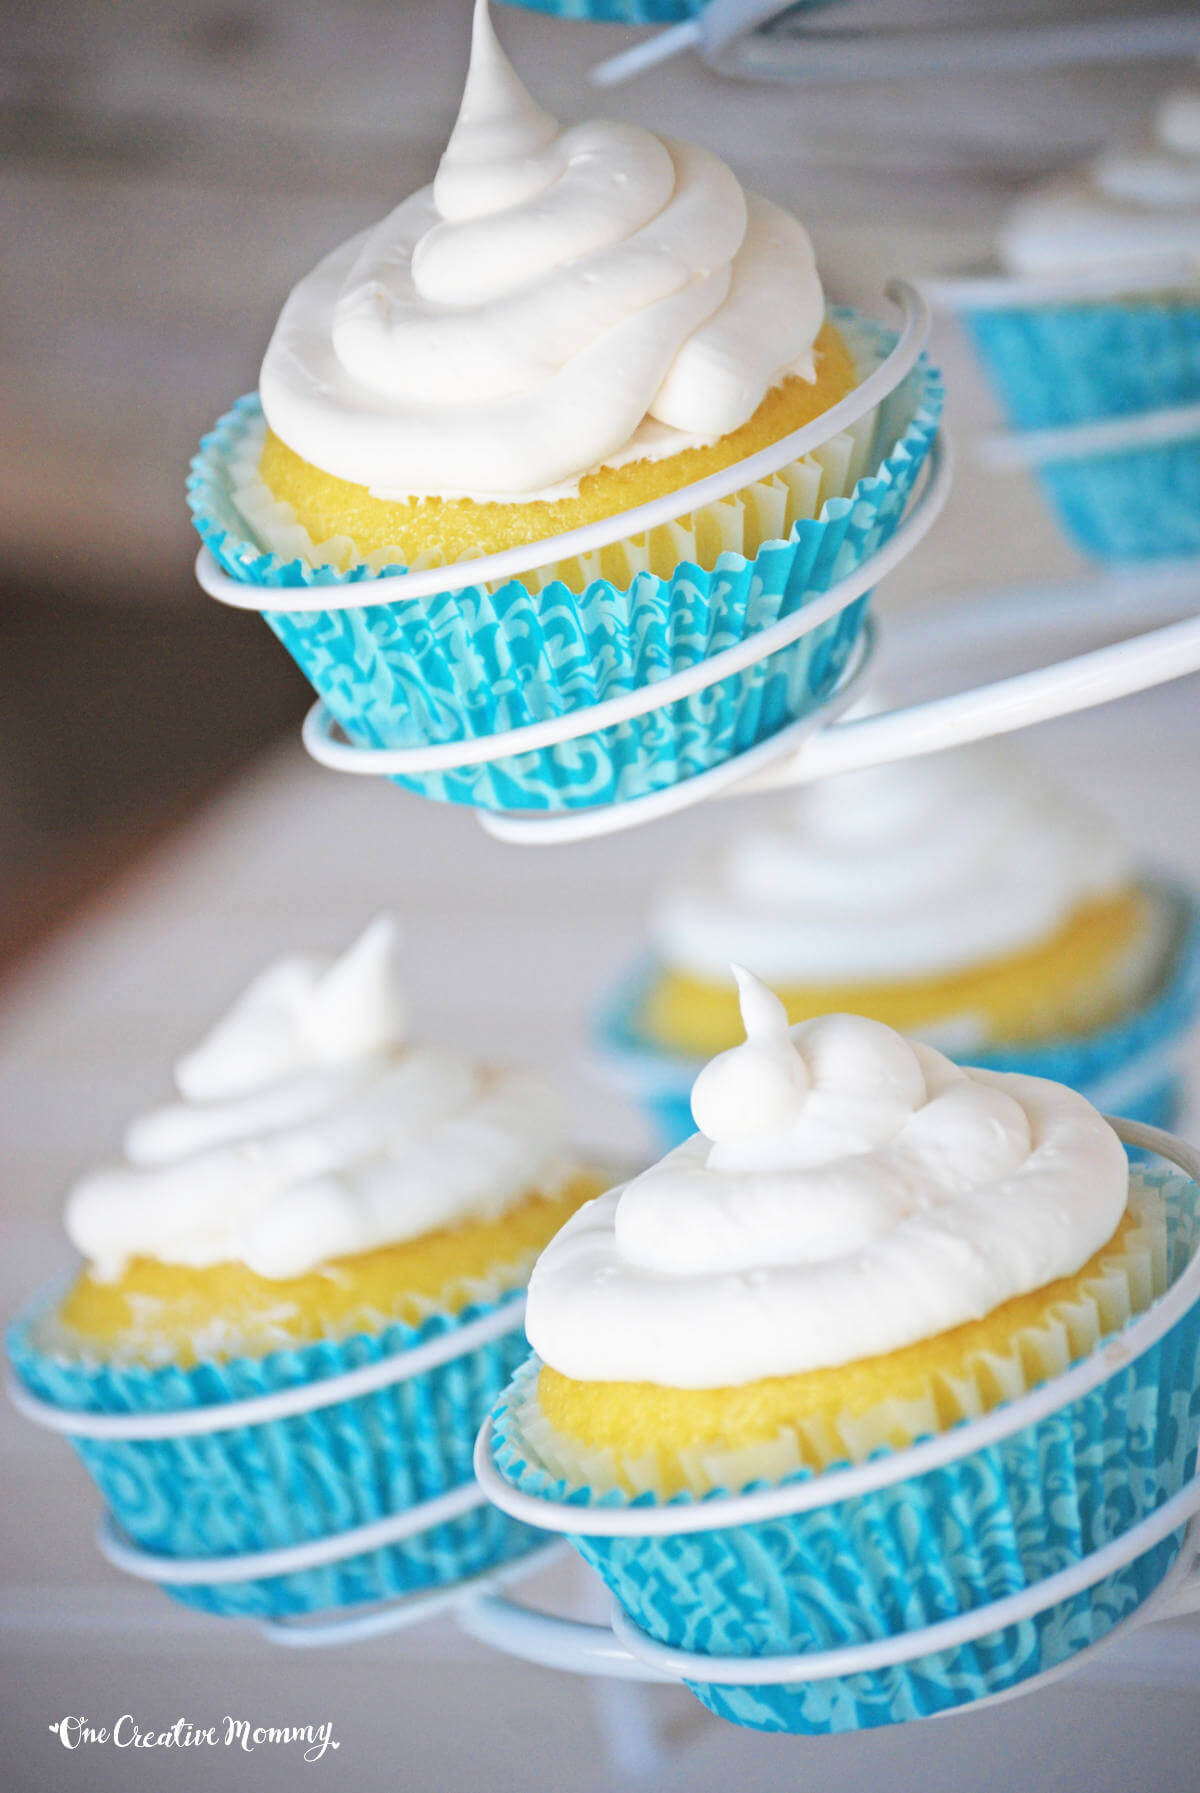 Several delicious gluten free lemon pound cake cupcakes arranged on a spiral cupcake stand. They are bright yellow, frosted with white frosting, and nestled inside blue cupcake liners.